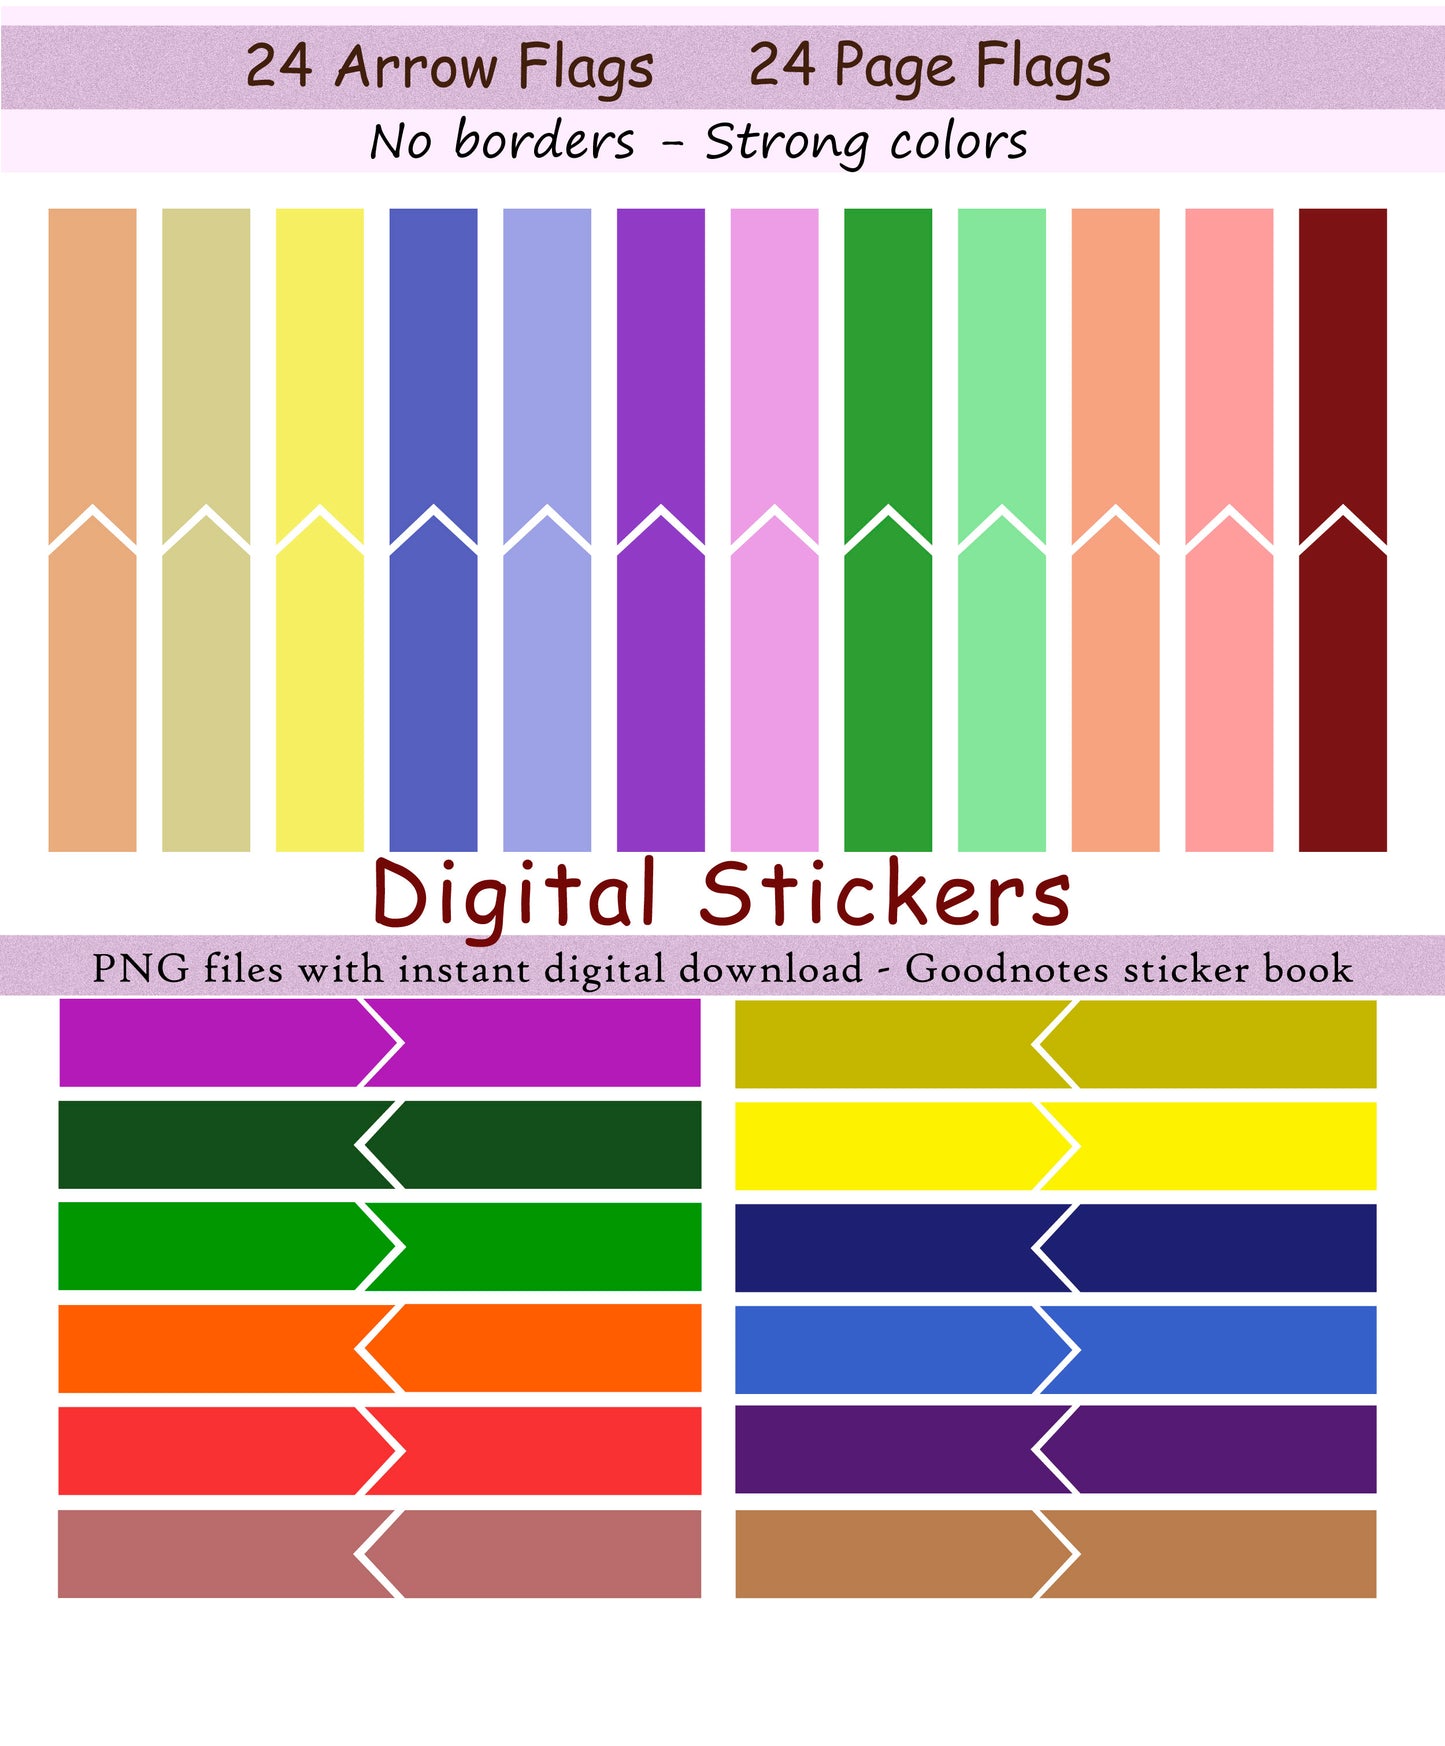 Arrow & page flags | Strong colors | NO border - Digital sticker